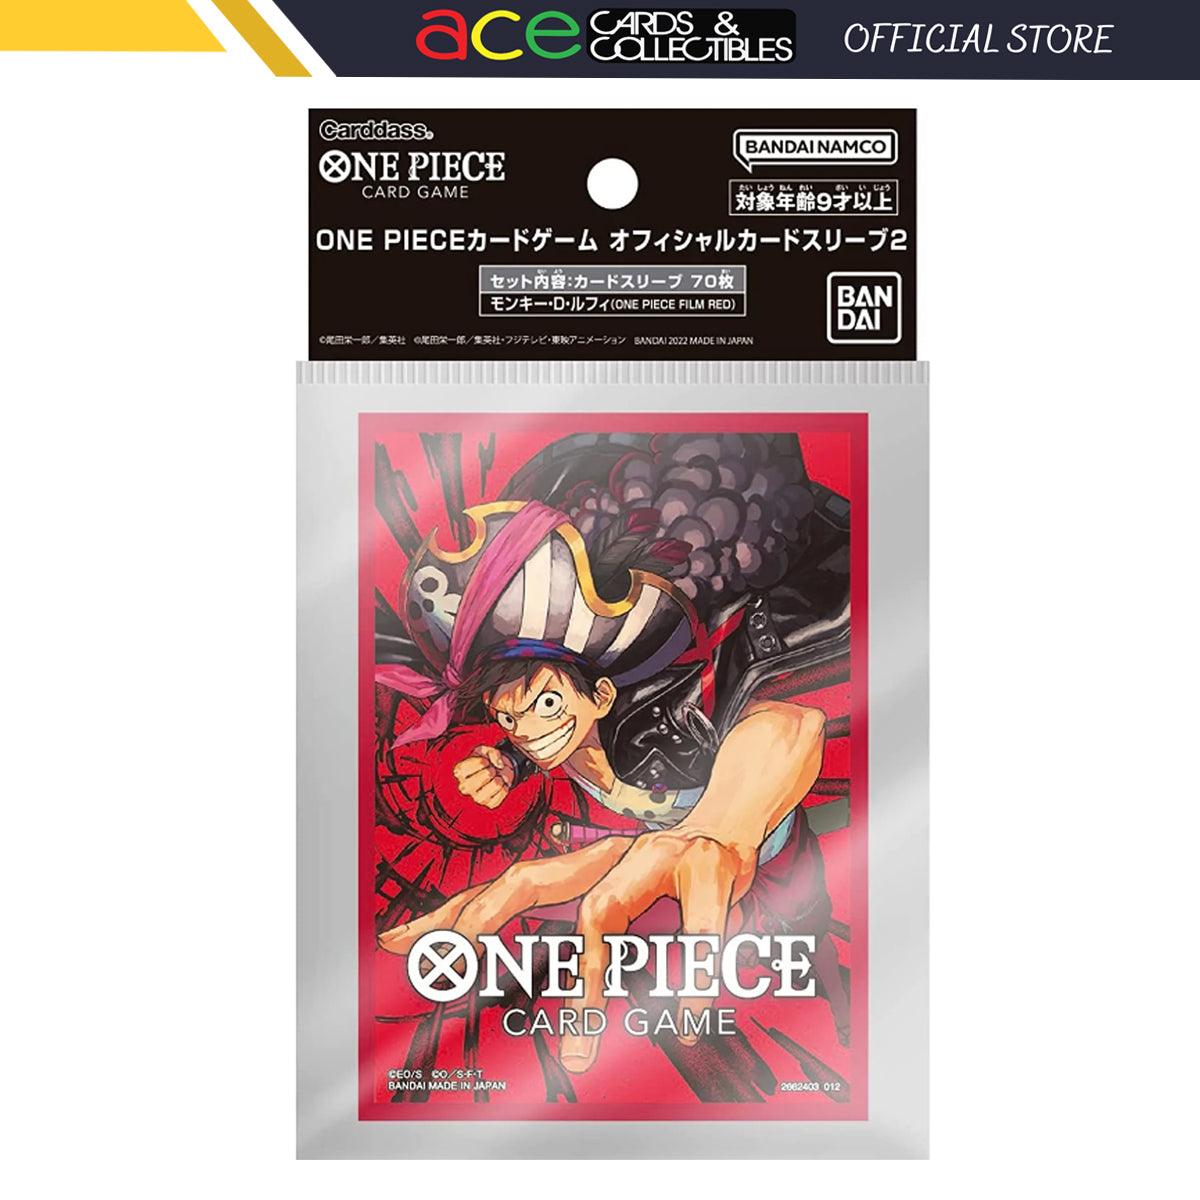 One Piece Card Game Official Deck Sleeves "Monkey D. Luffy" (Vol. 2)-Bandai Namco-Ace Cards & Collectibles